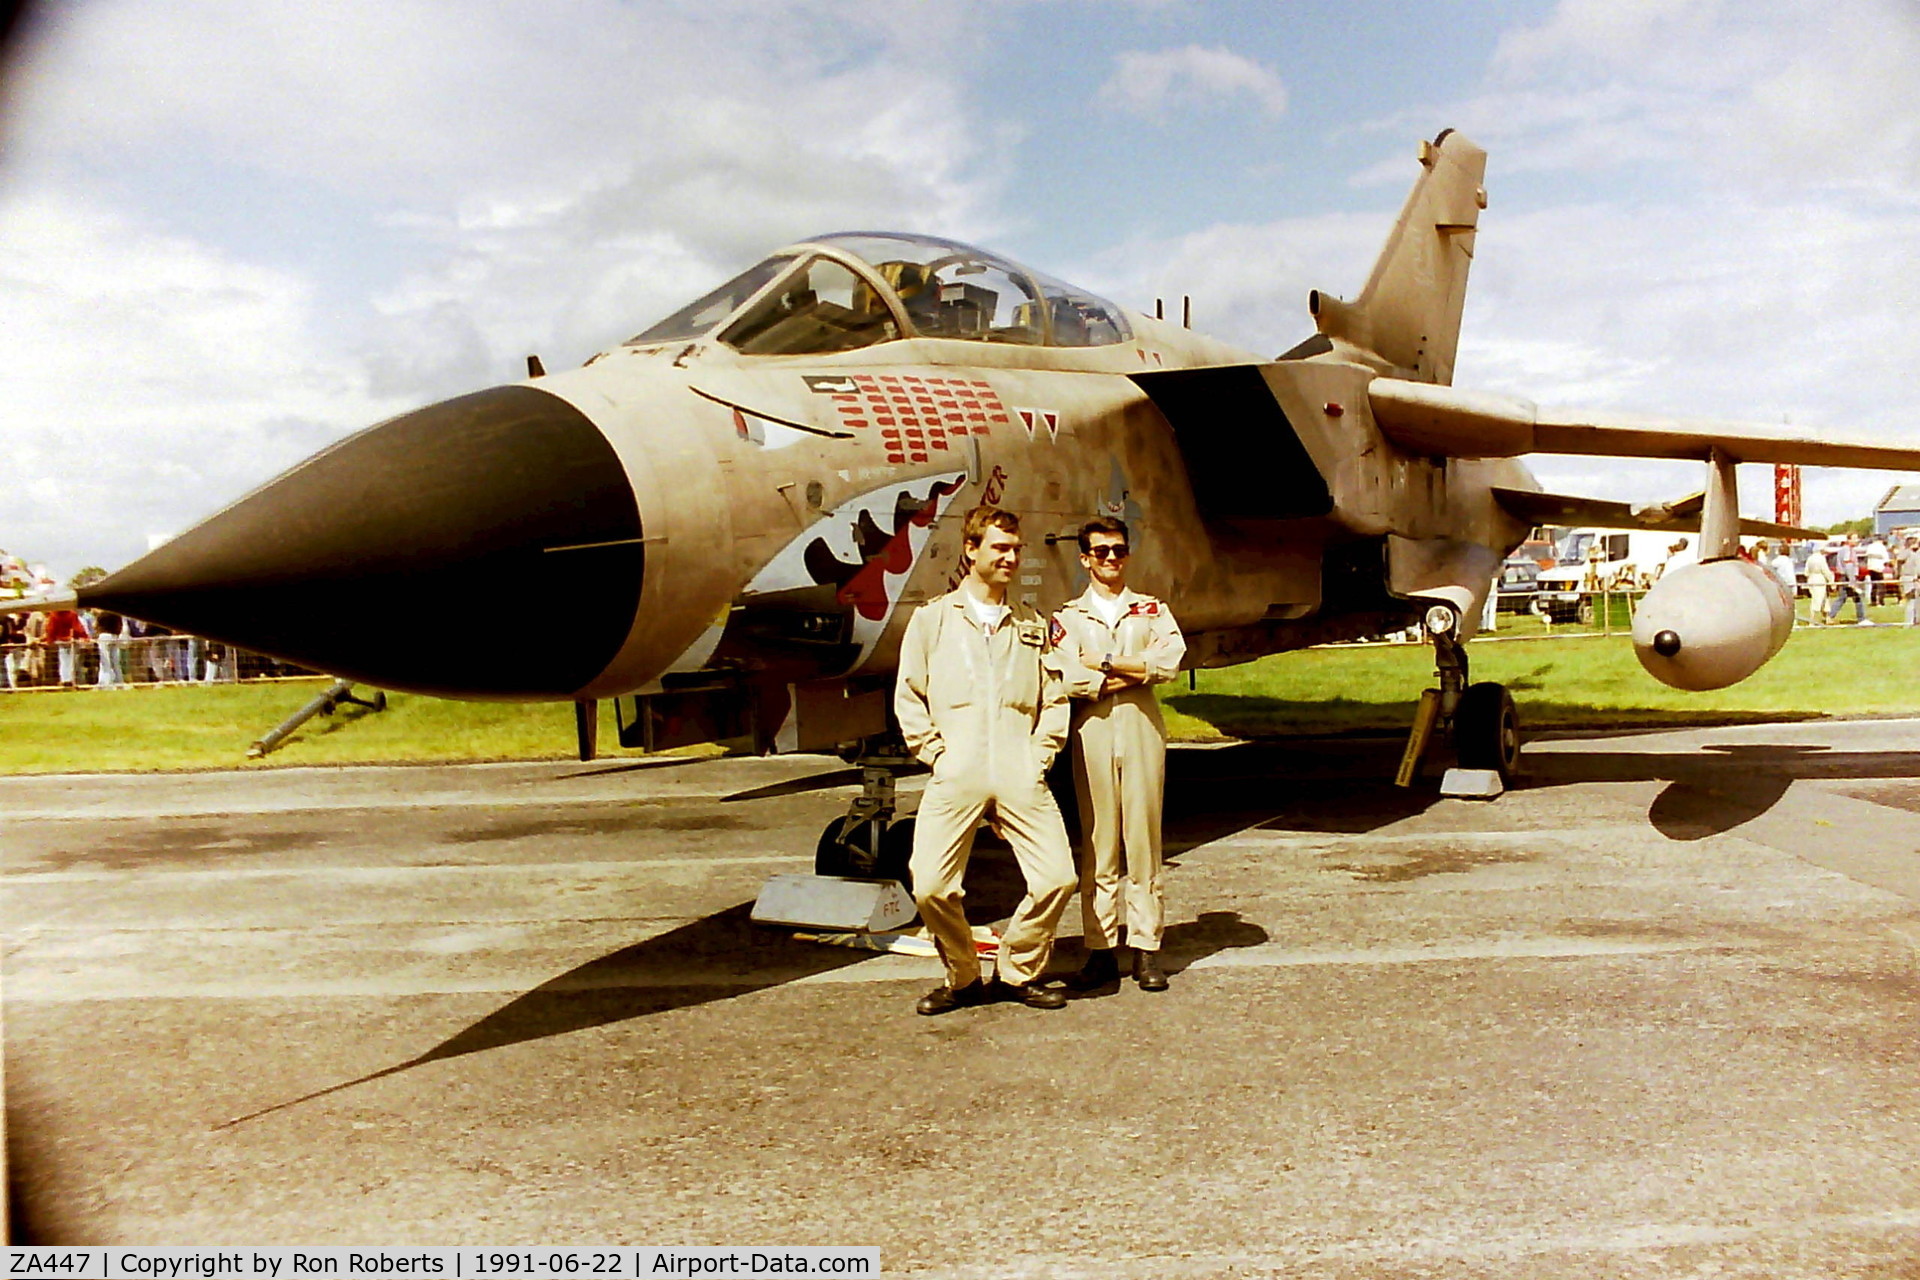 ZA447, 1983 Panavia Tornado GR.1 C/N 235/BS077/3113, Taken at Woodford Airshow with the Crew 22/6/91 after the First Gulf War